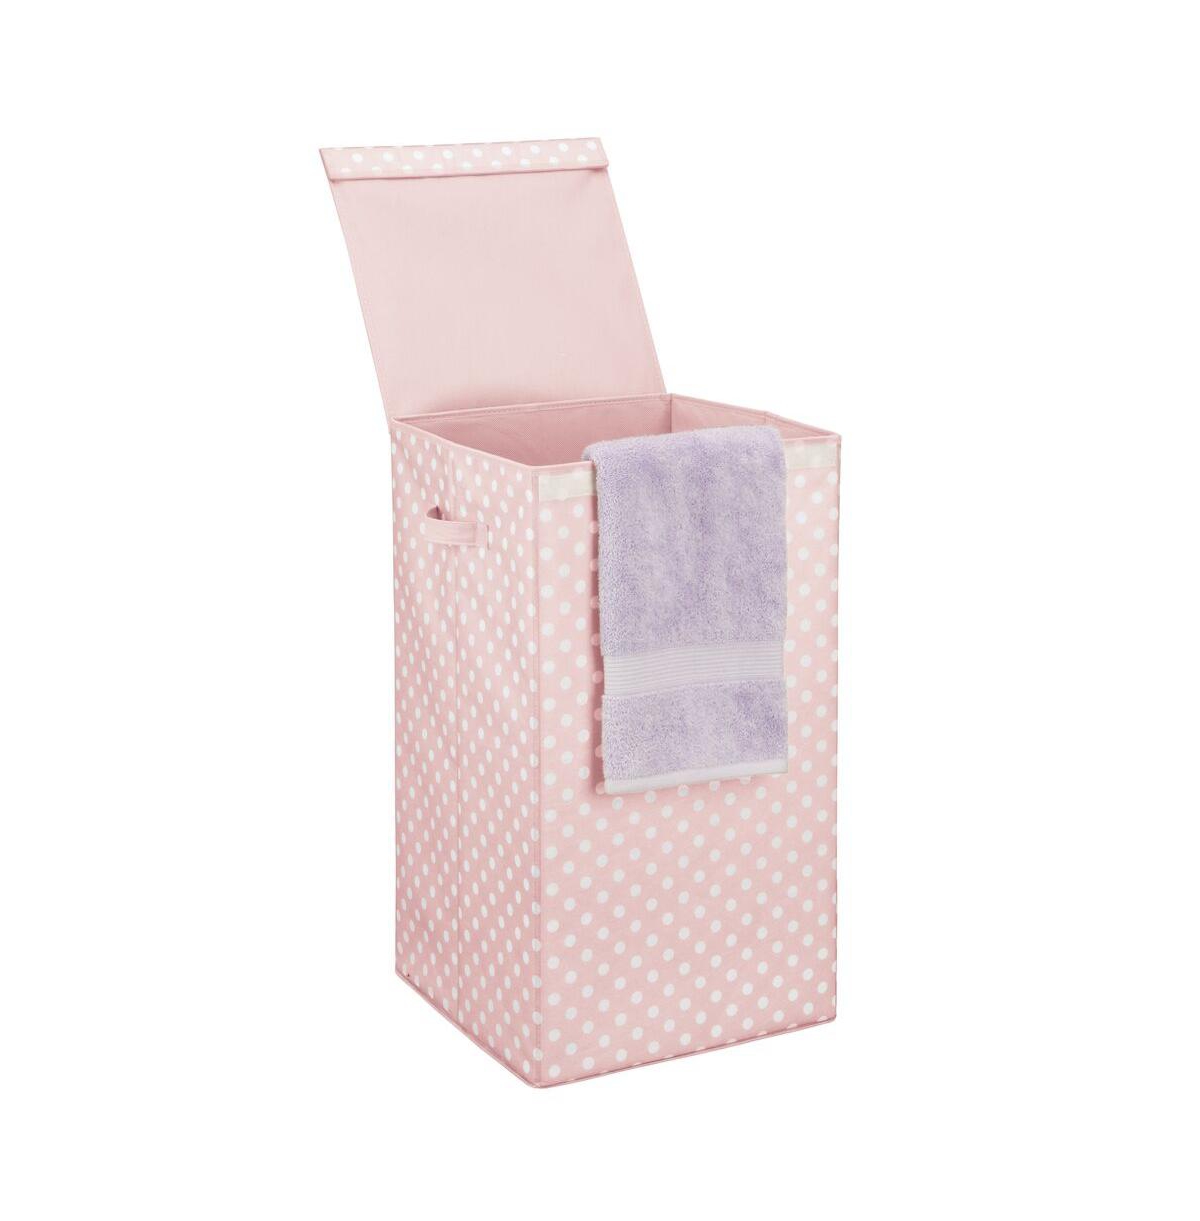 Large Single Hamper Basket with Lid and Handles - Pink/white